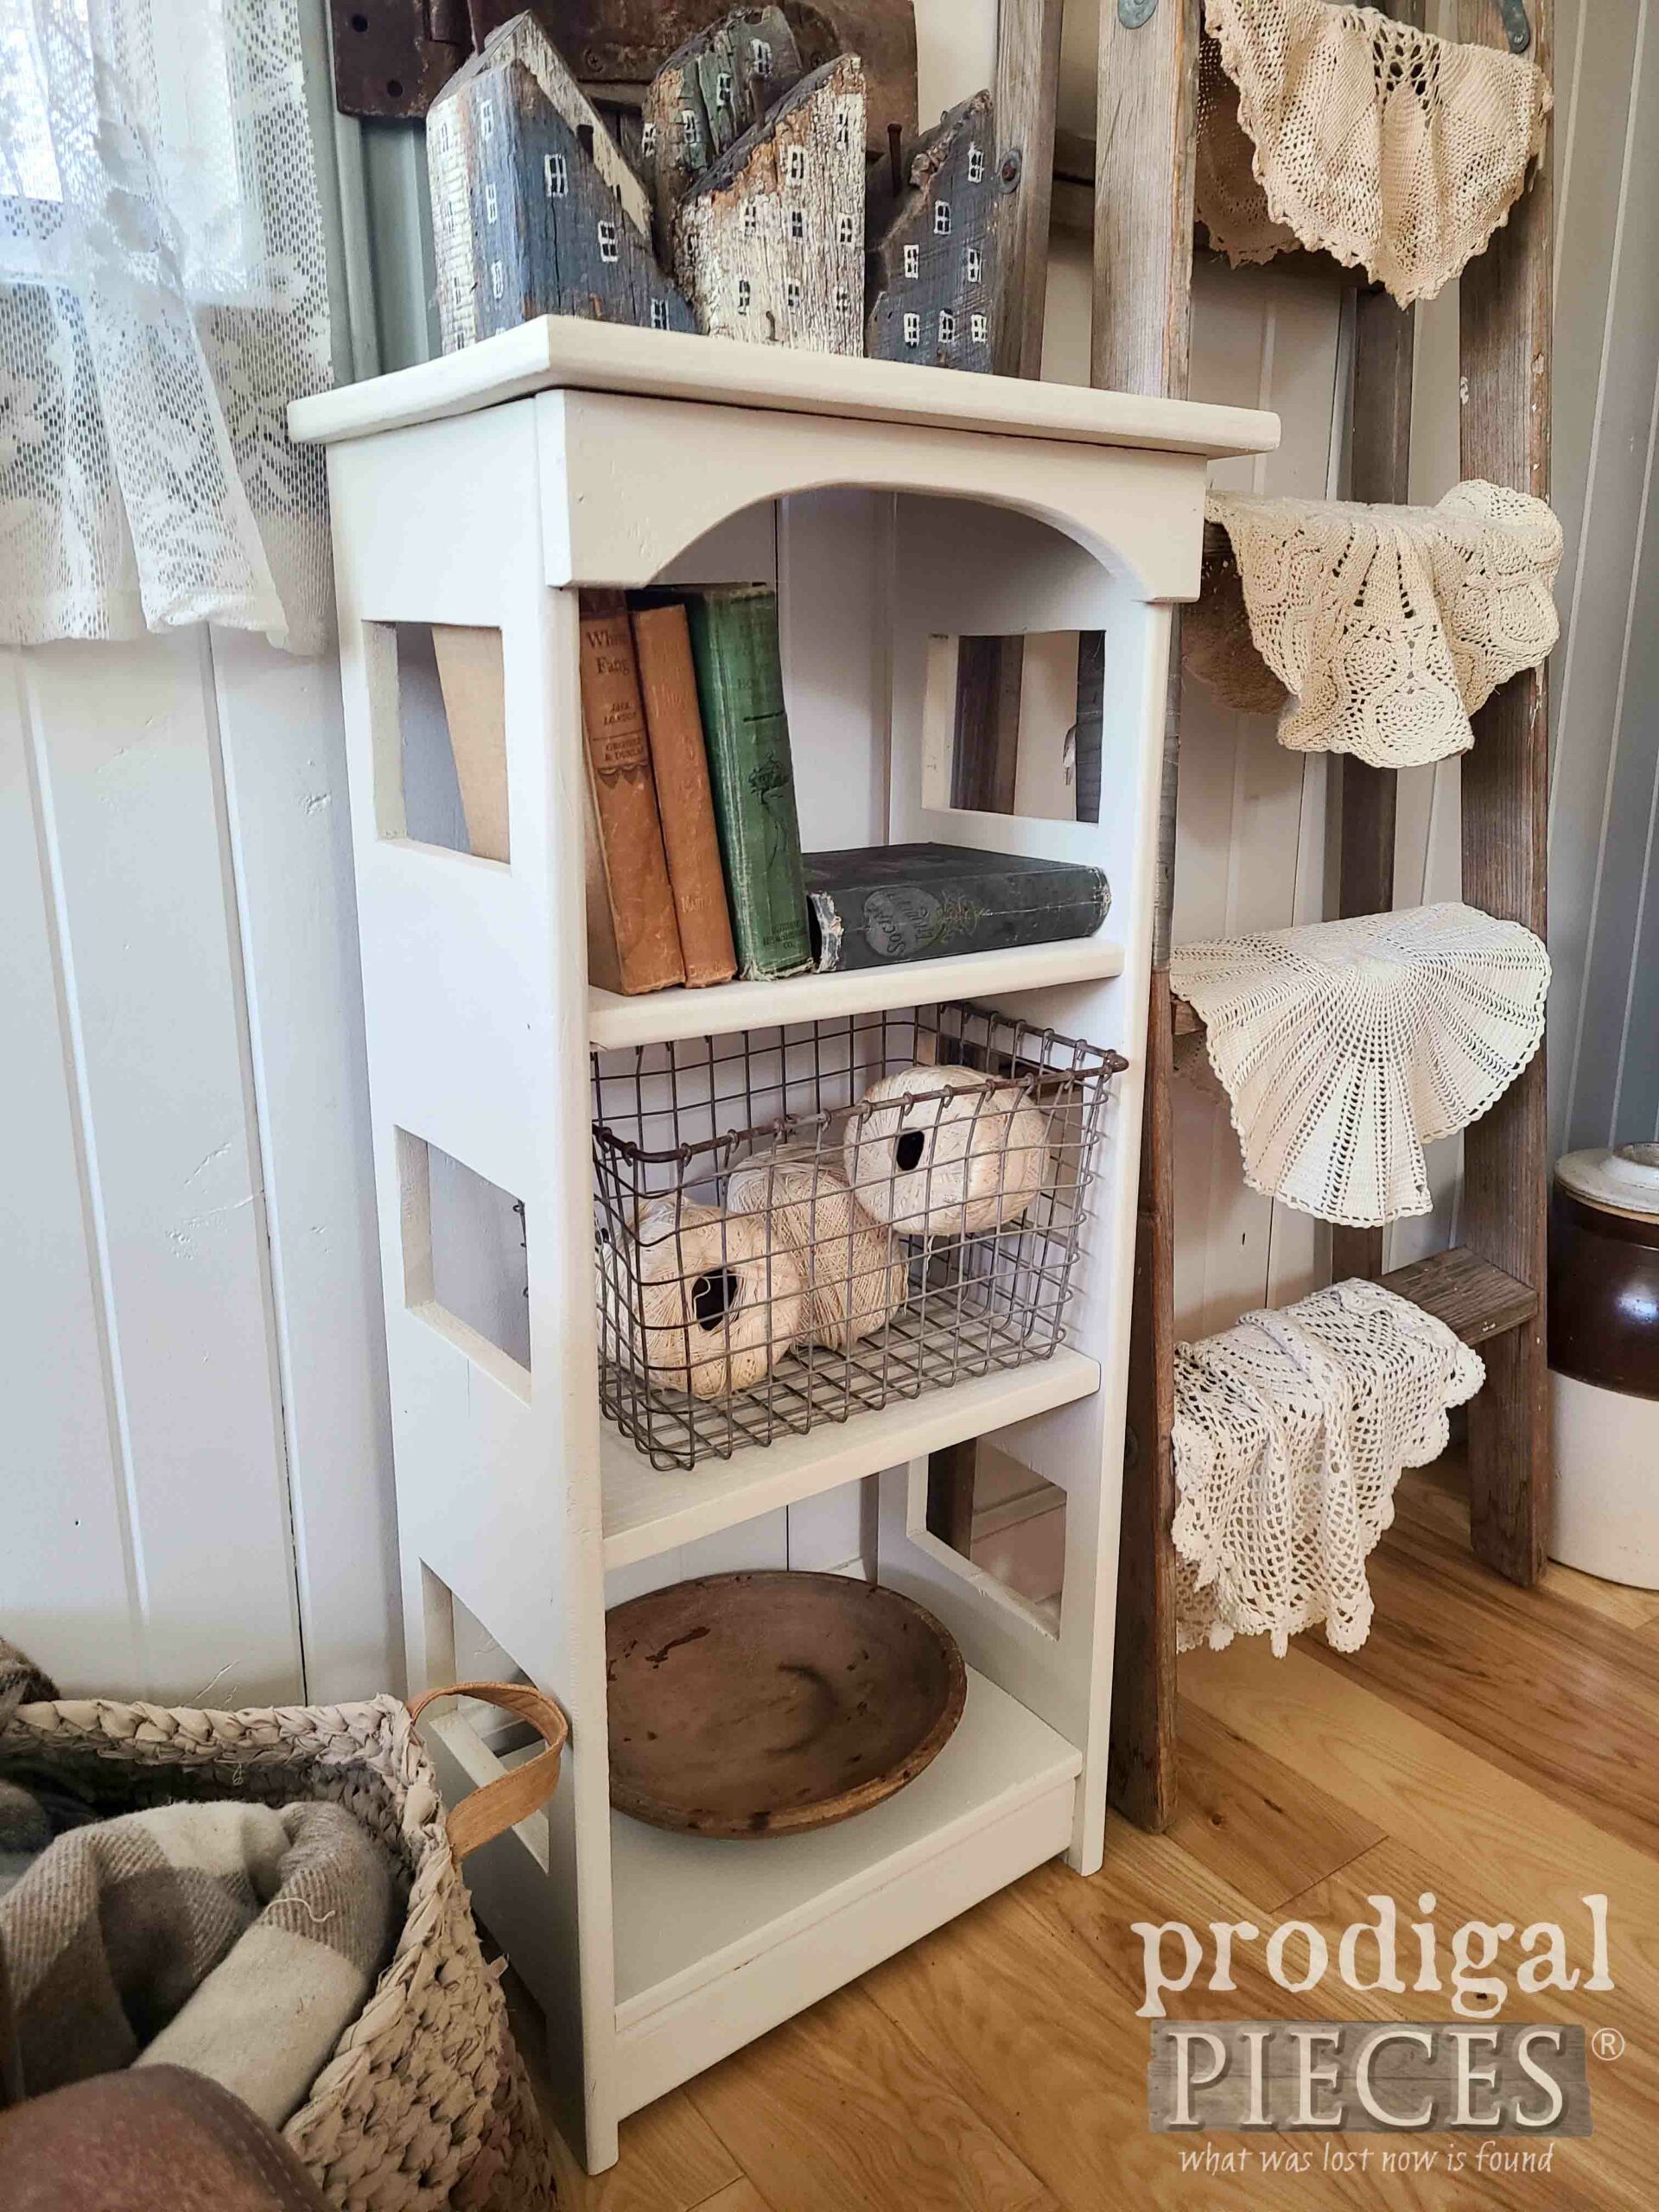 Upcycled Bookshelf from Curbside Find by Larissa of Prodigal Pieces | prodigalpieces.com #prodigalpieces #diy #farmhouse #vintage